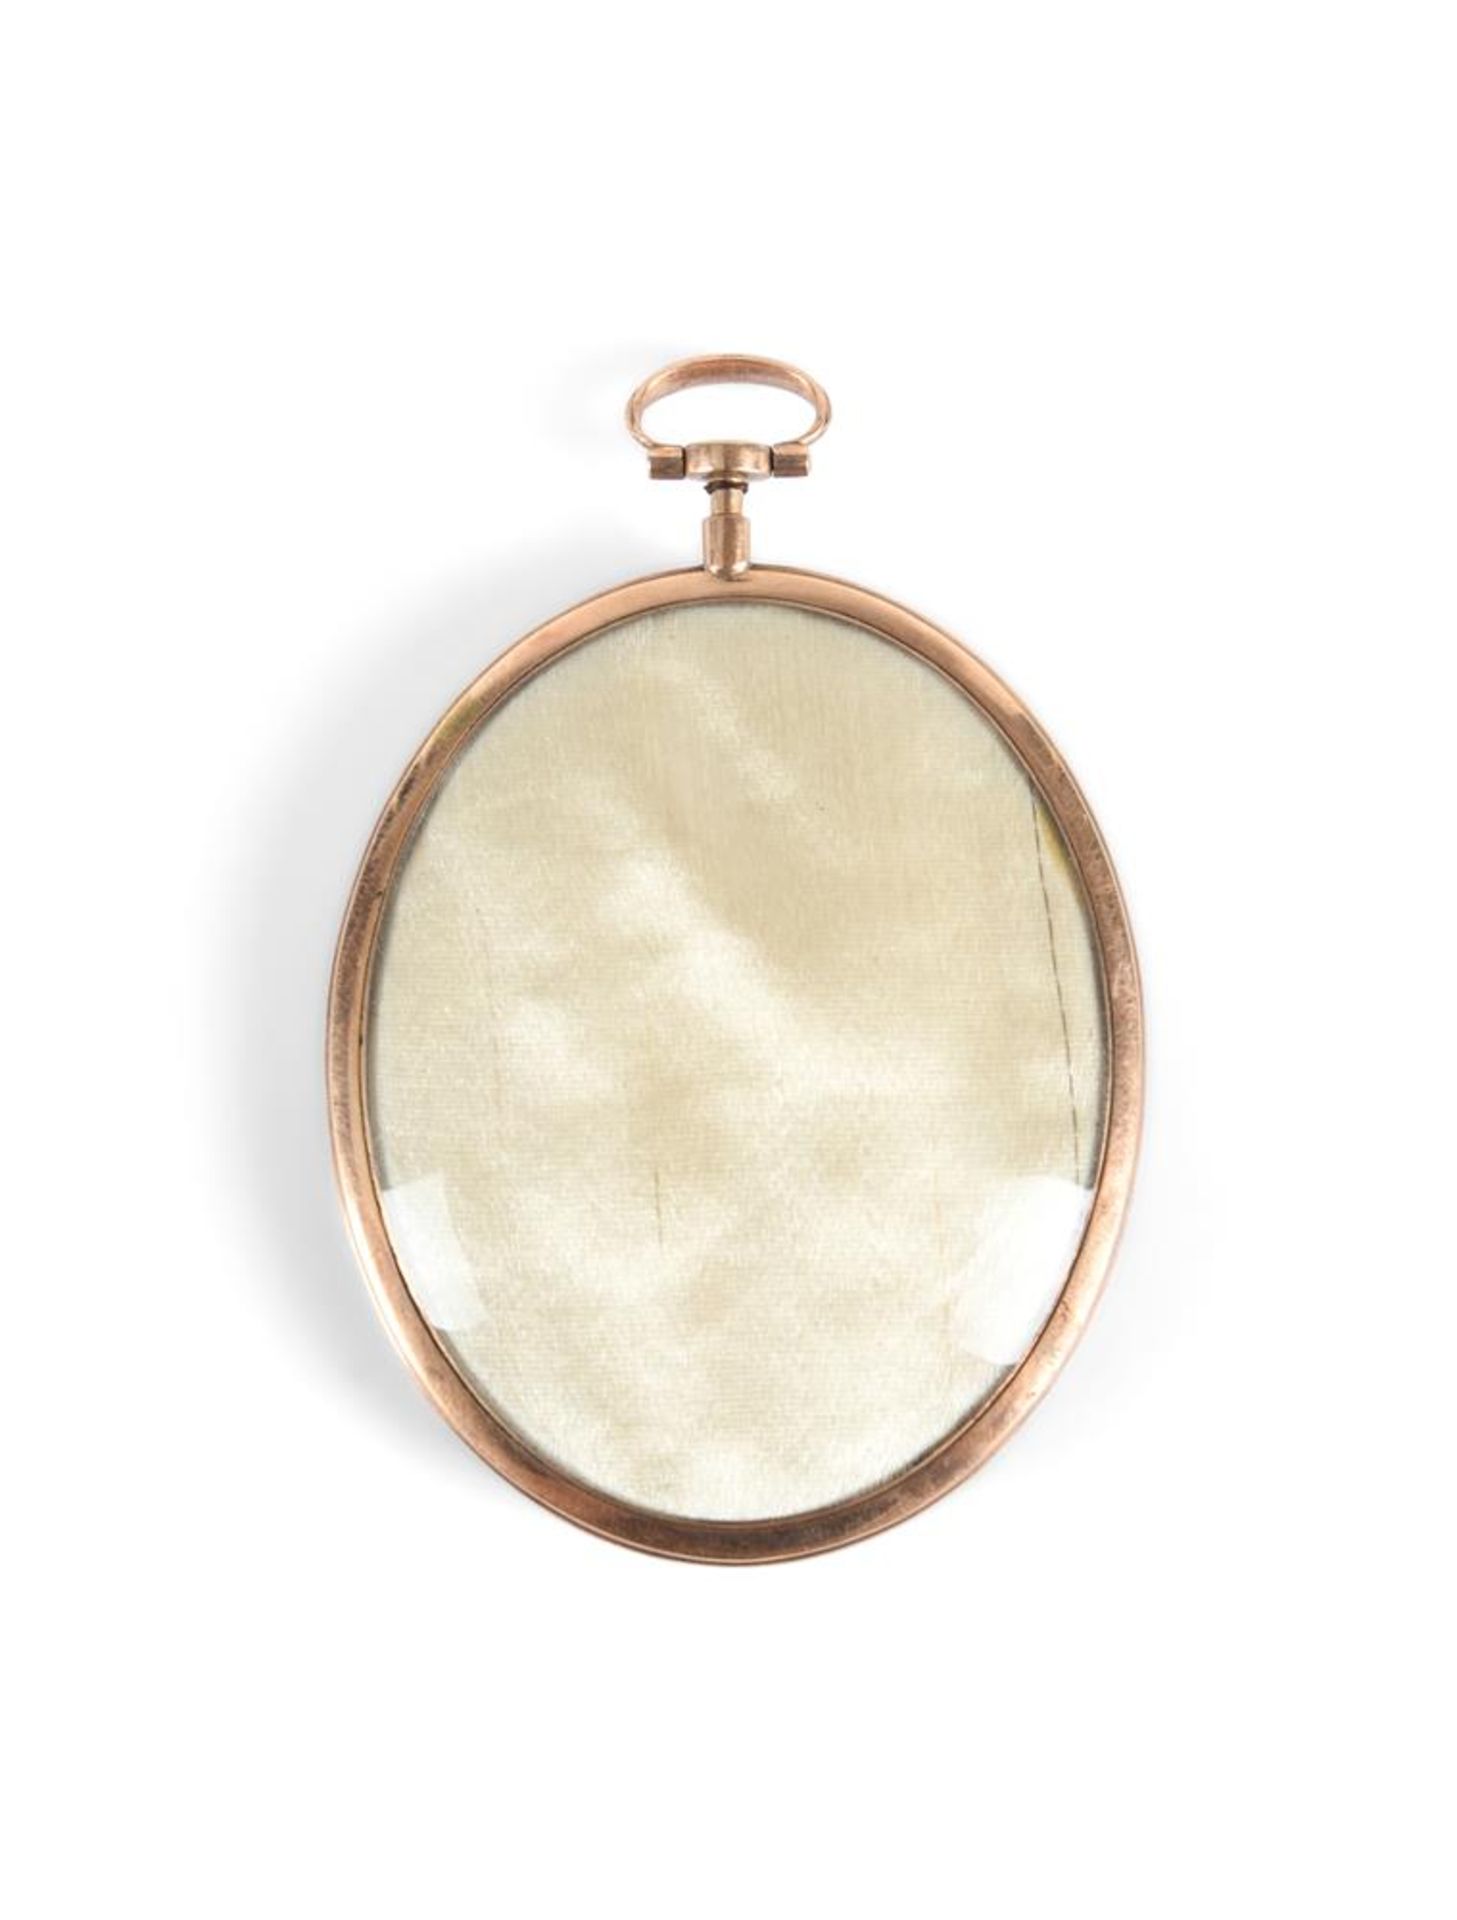 Y A GEORGE III MOURNING LOCKET PENDANT, CIRCA 1790 - Image 2 of 2